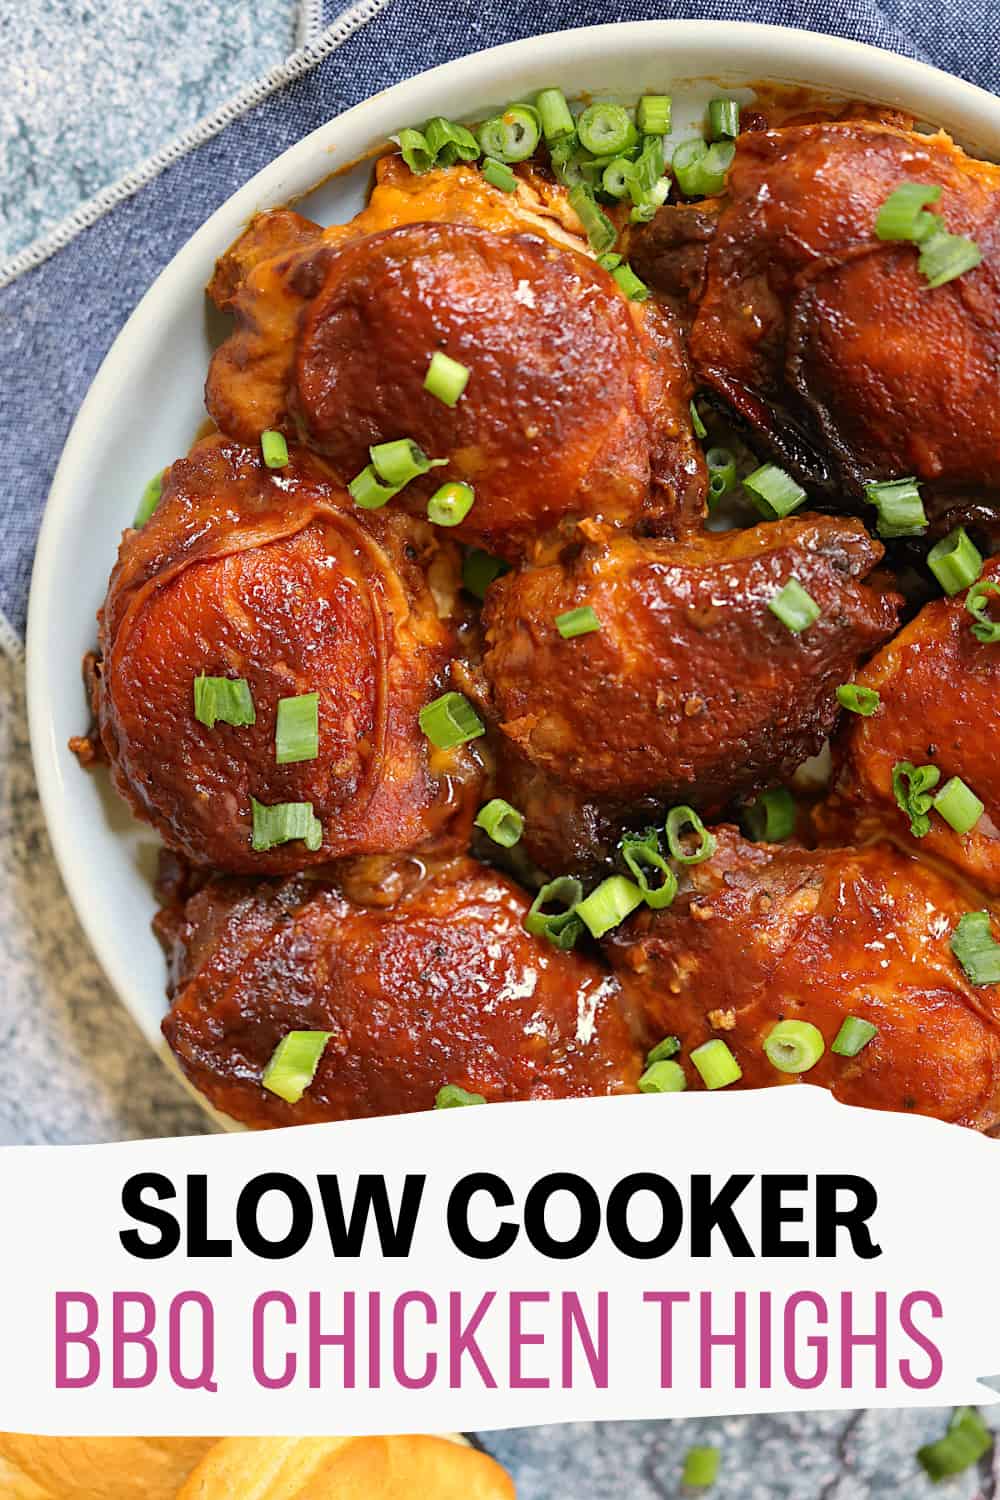 Slow Cooker BBQ Chicken Thighs